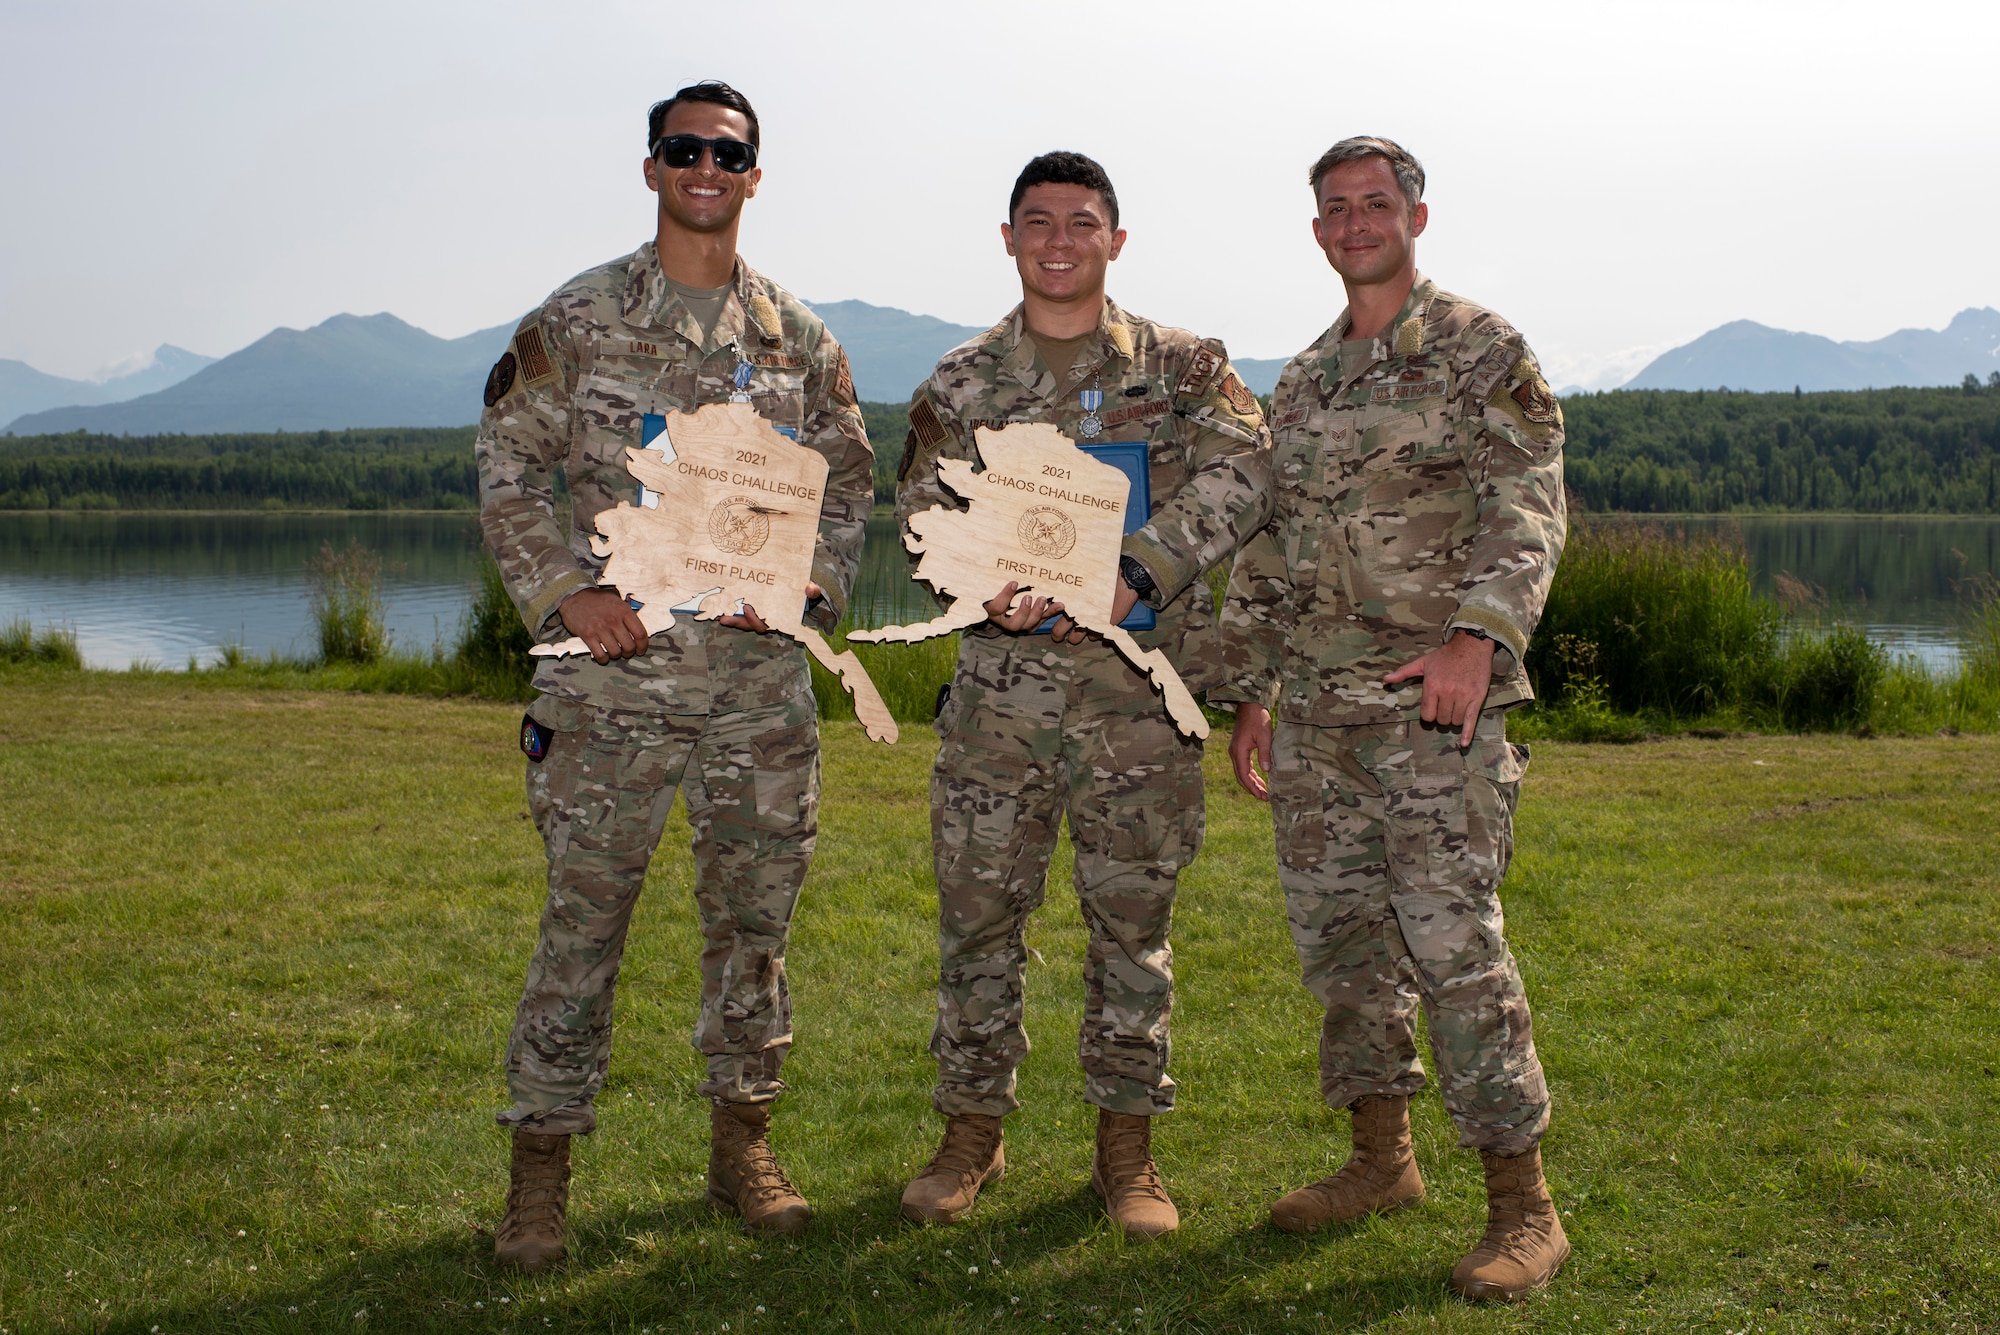 U.S. Air Force Staff Sgt. Jacob Lara, left, Senior Airman Matthew Arellano, and Staff Sgt. Thomas Rodriguez, 25th Air Support Operations Squadron pause for a photo after winning the Chaos Challenge 2021 at Joint Base Elmendorf-Richardson, Alaska, July 16, 2021. The Chaos Challenge 2021 was a multi-day series of mental and physical contests sponsored by the 1st Air Support Operations Group with participants from the 3rd, 5th, 25th, and 604th Air Support Operations Squadrons and a guest team from the 673d Security Forces Squadron. The winner of the competition will go on to compete in Lightning Challenge 2021 to determine the best two-man TACP team in the Air Force.